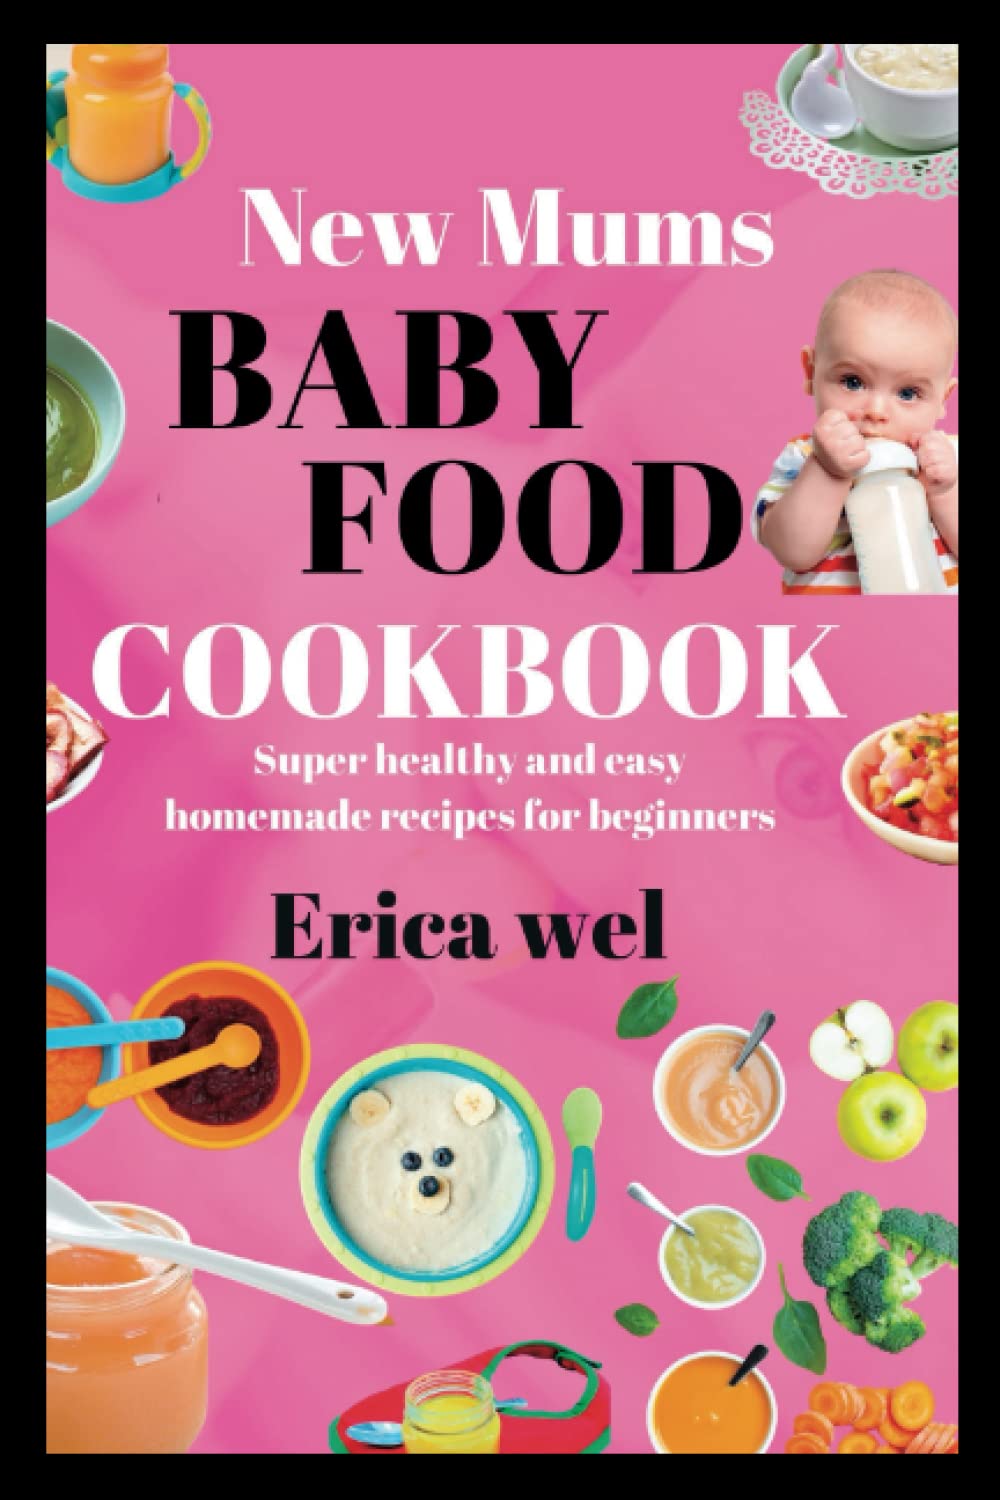 NEW MUMS BABY FOOD COOKBOOK: SUPER HEALTHY AND EASY HOMEMADE RECIPES FOR BEGINNERS